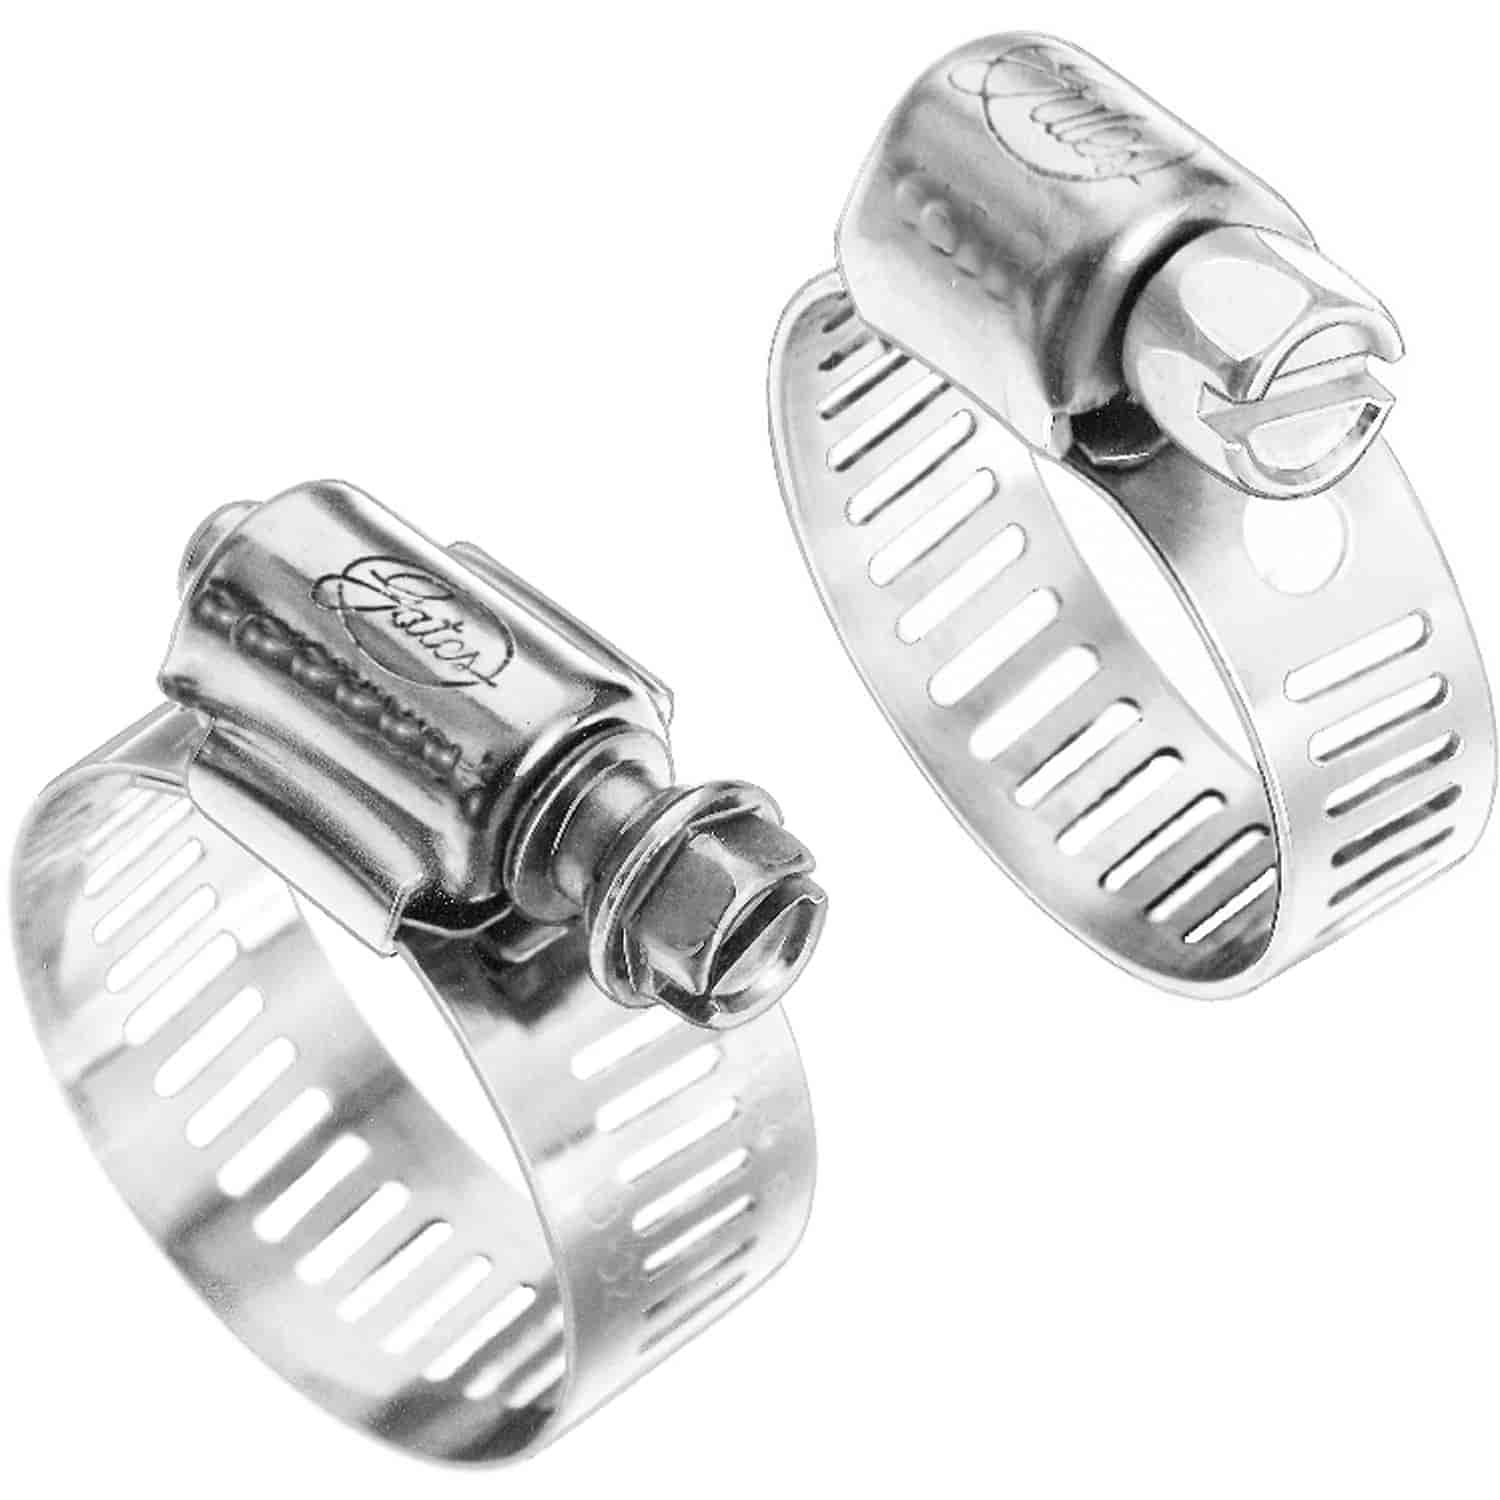 Stainless Steel Hose Clamps Size 1 (.15625